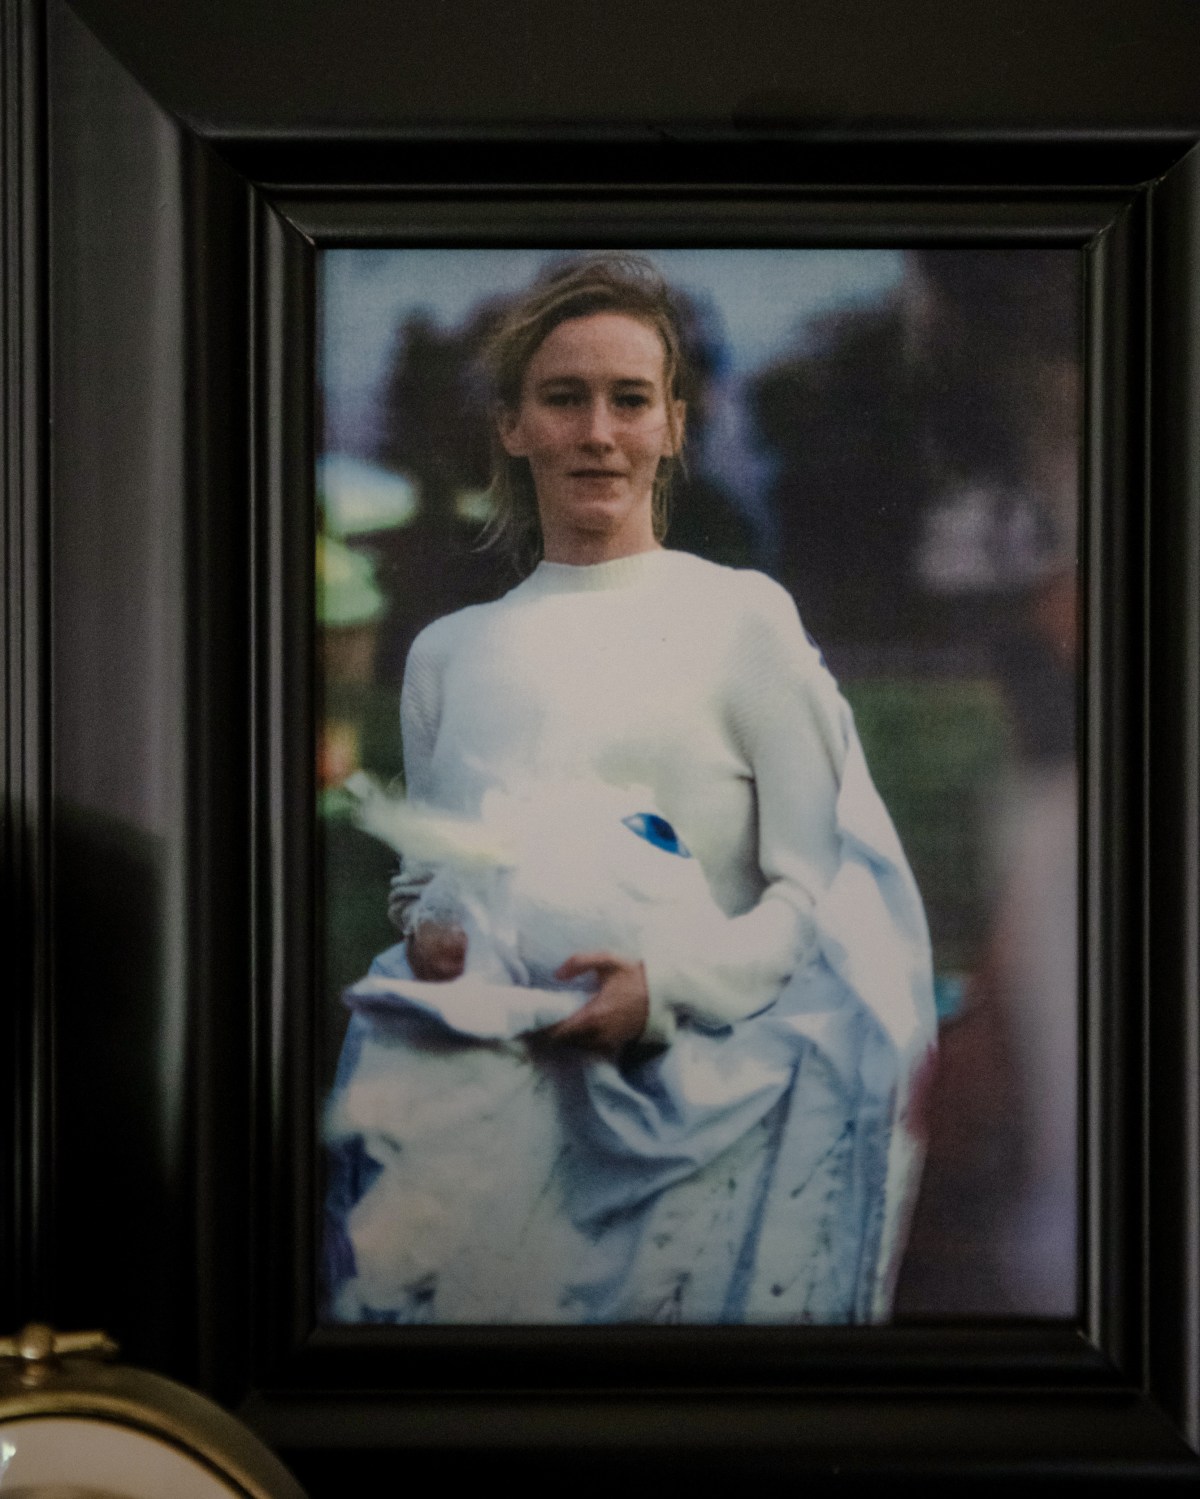 A framed photo of Rachel Corrie at her sister Sarah Corrie's home in Olympia, WA July 10, 2022. Kholood Eid for The Intercept